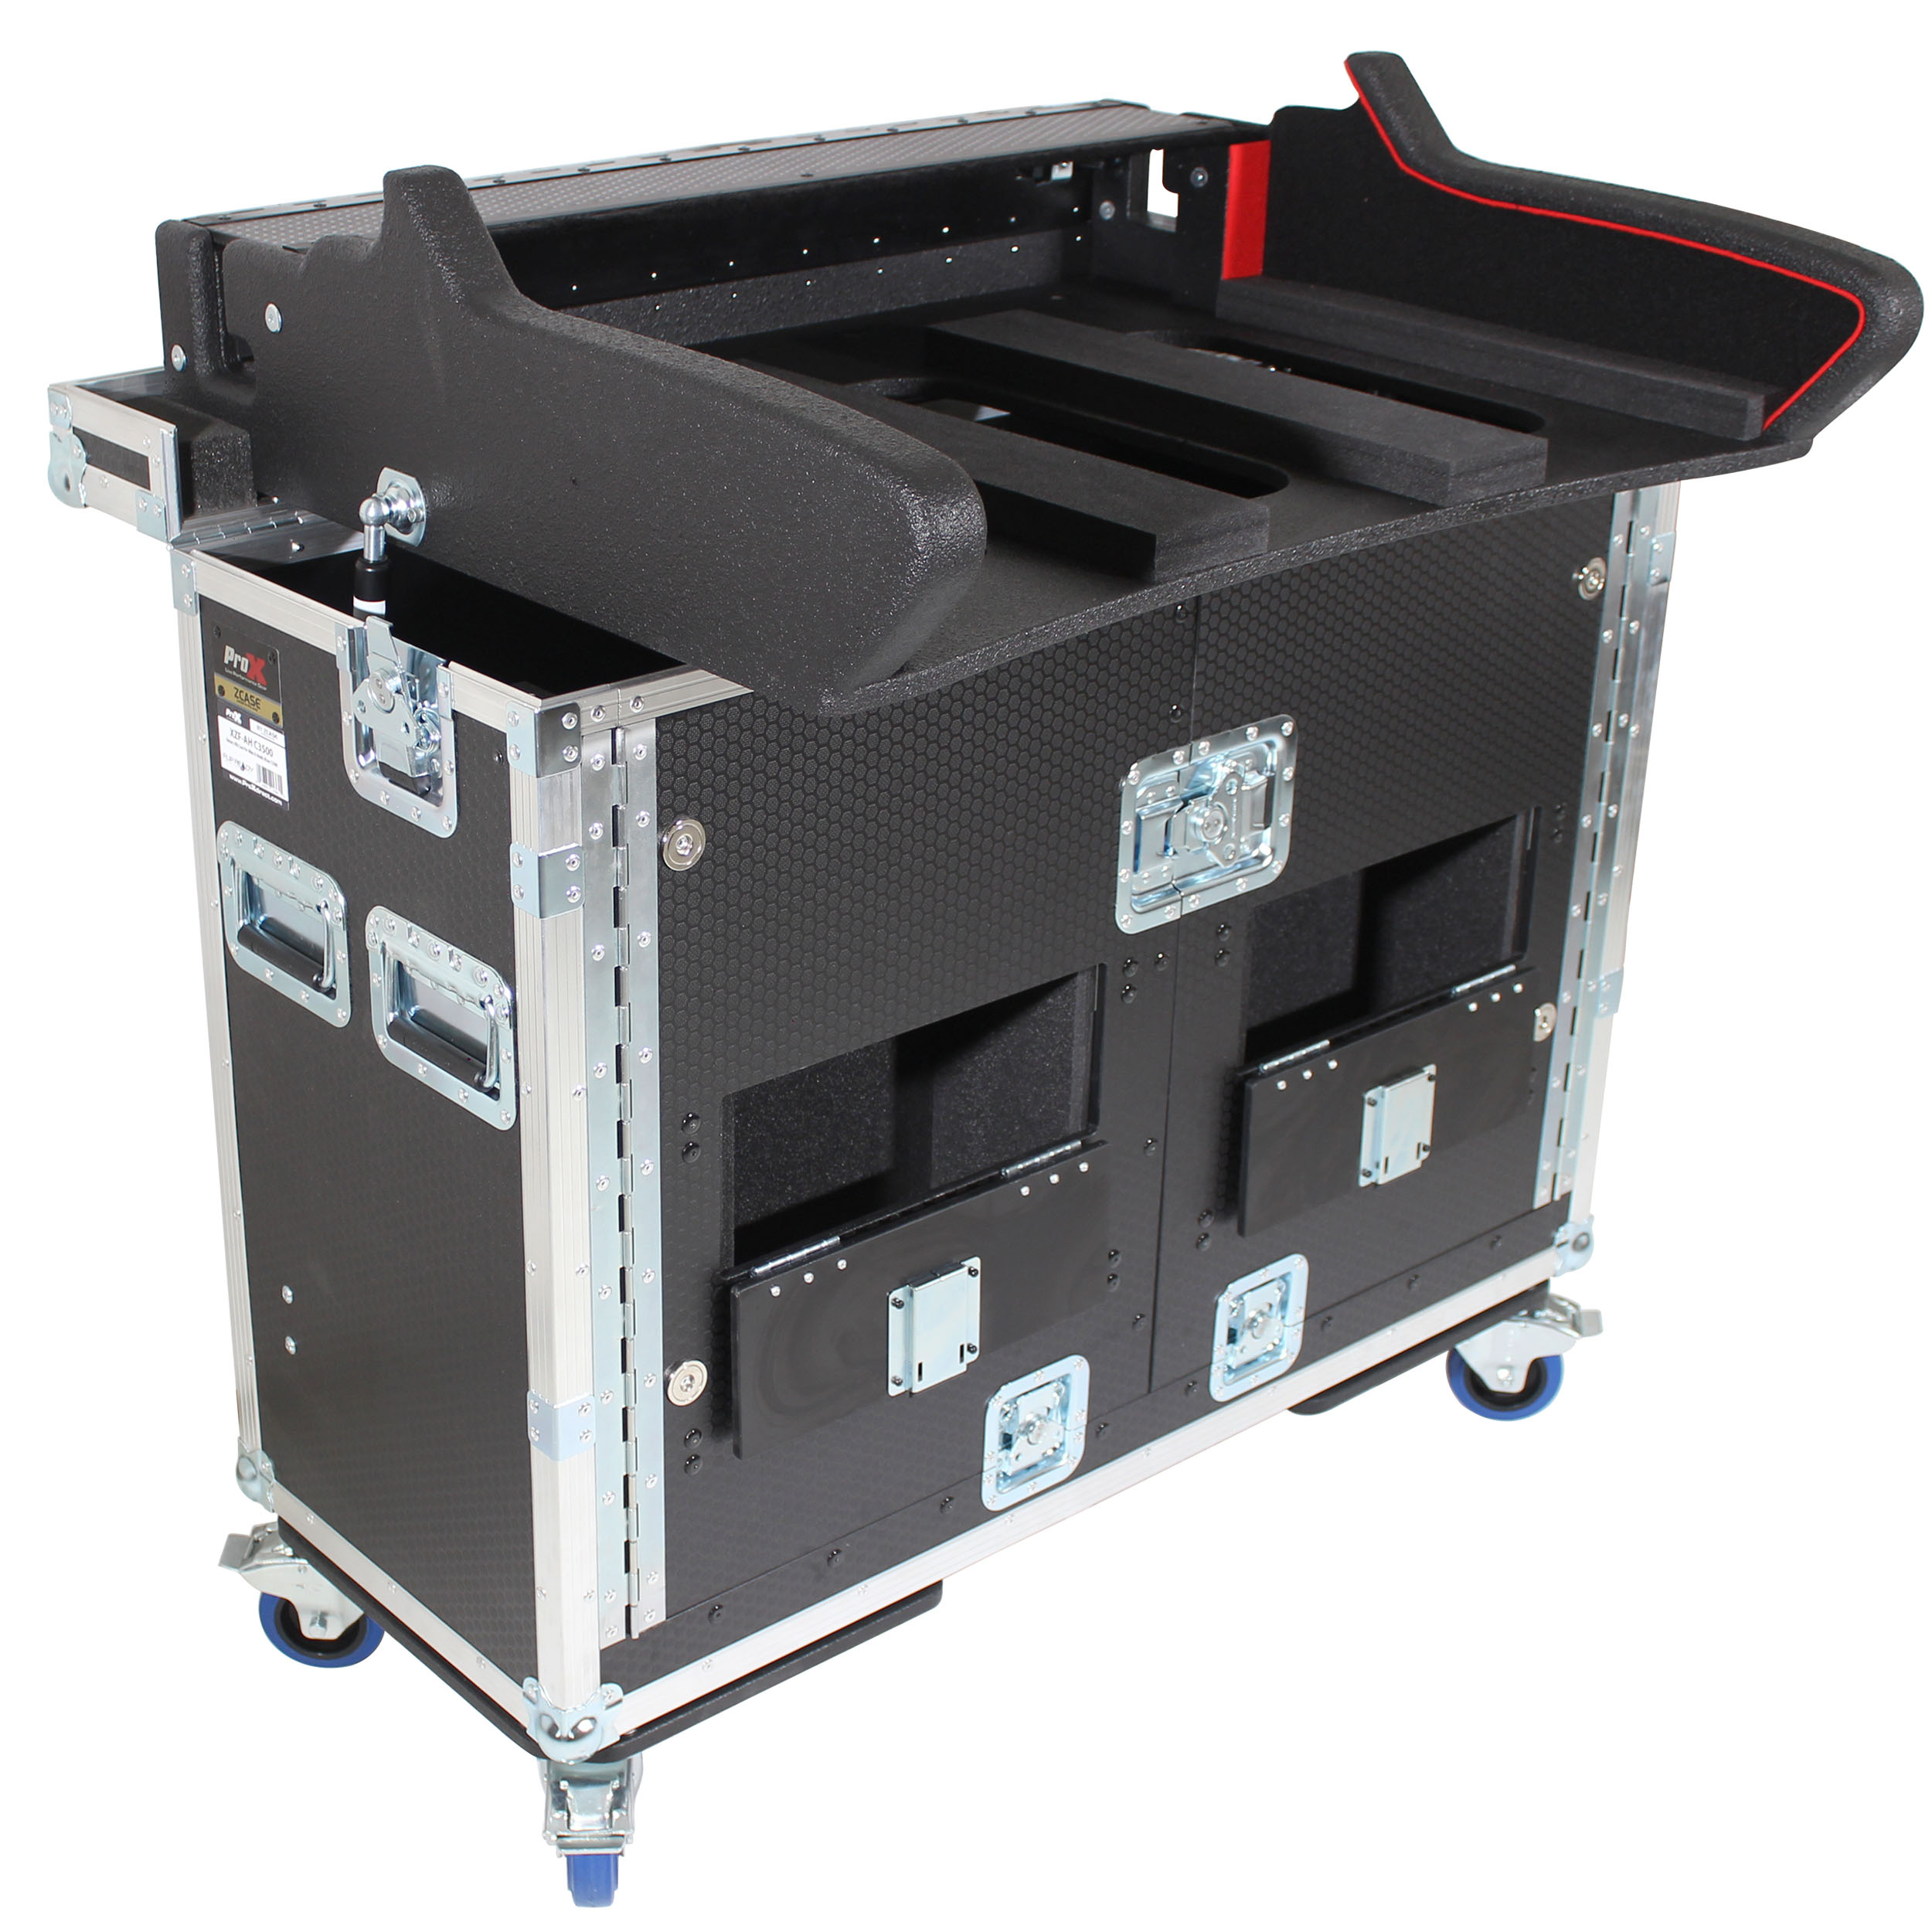 For Allen and Heath DLive S5000 Flip-Ready Hydraulic Console Easy Retracting Lifting Case by ZCASE